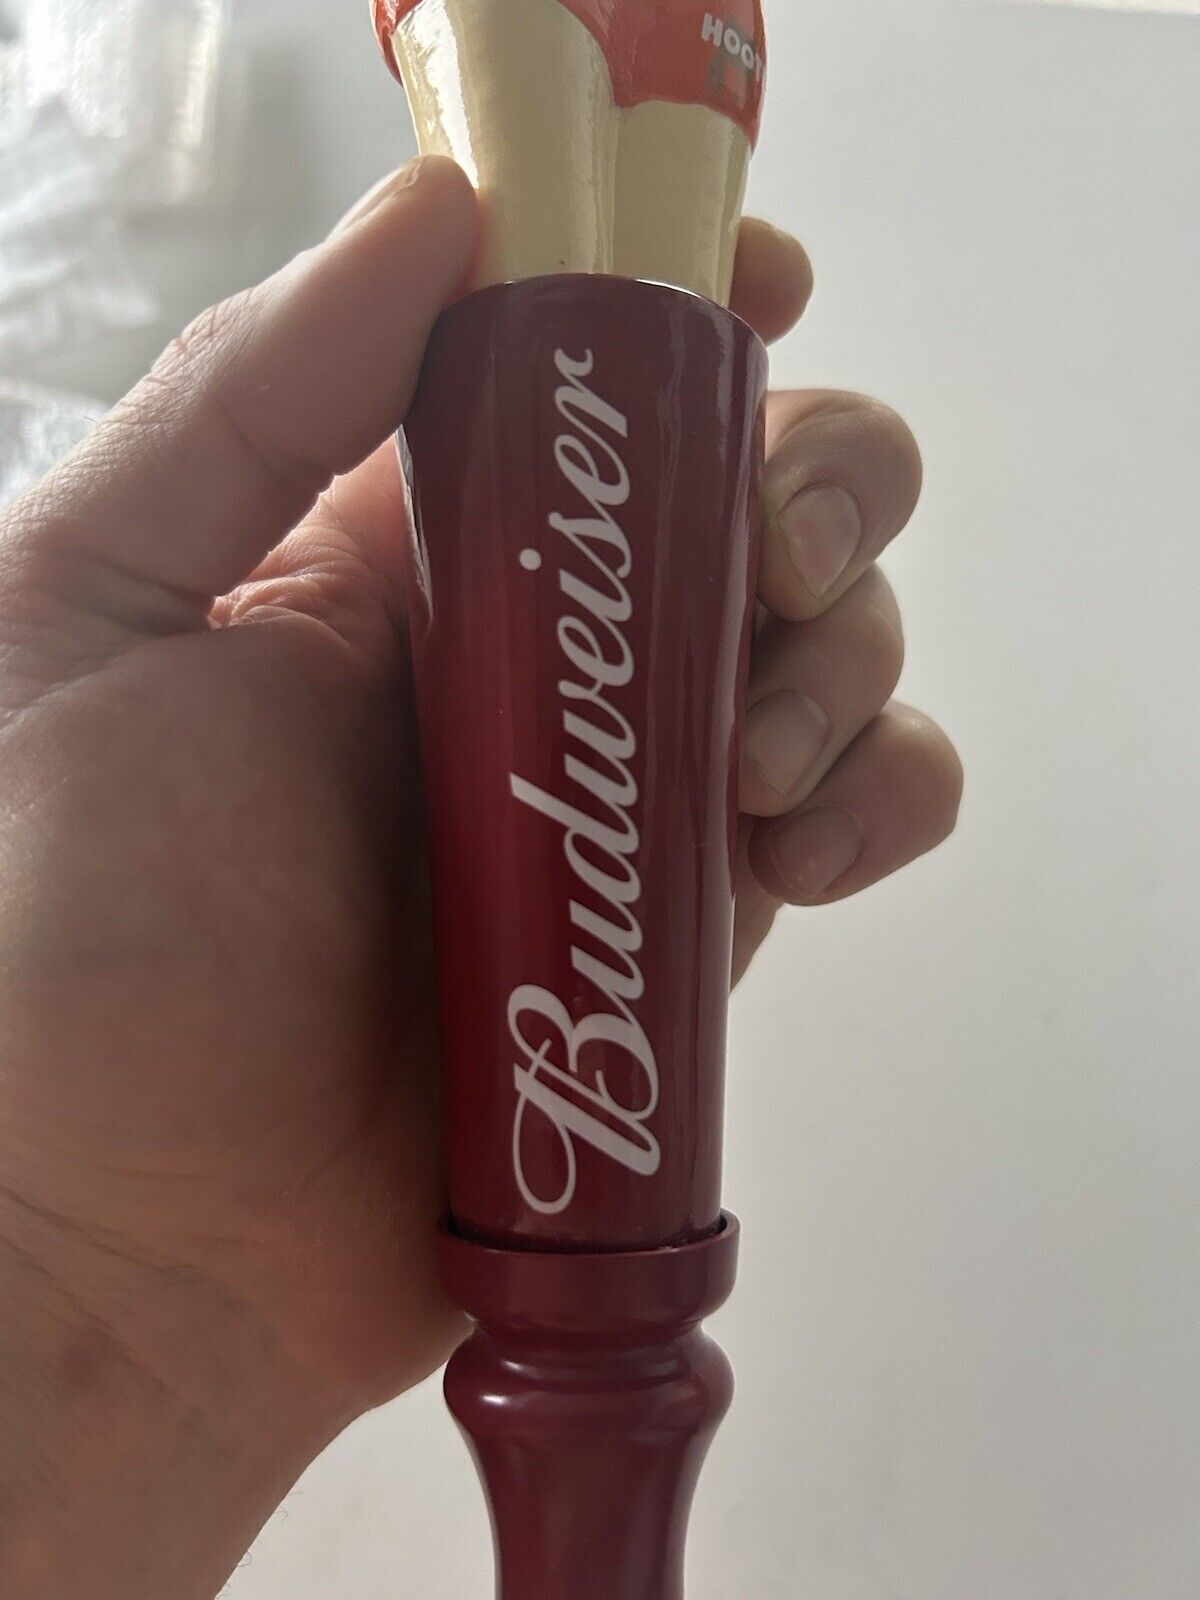 Budweiser Hooters Beer Tap Handle Sexy Waitress Rare